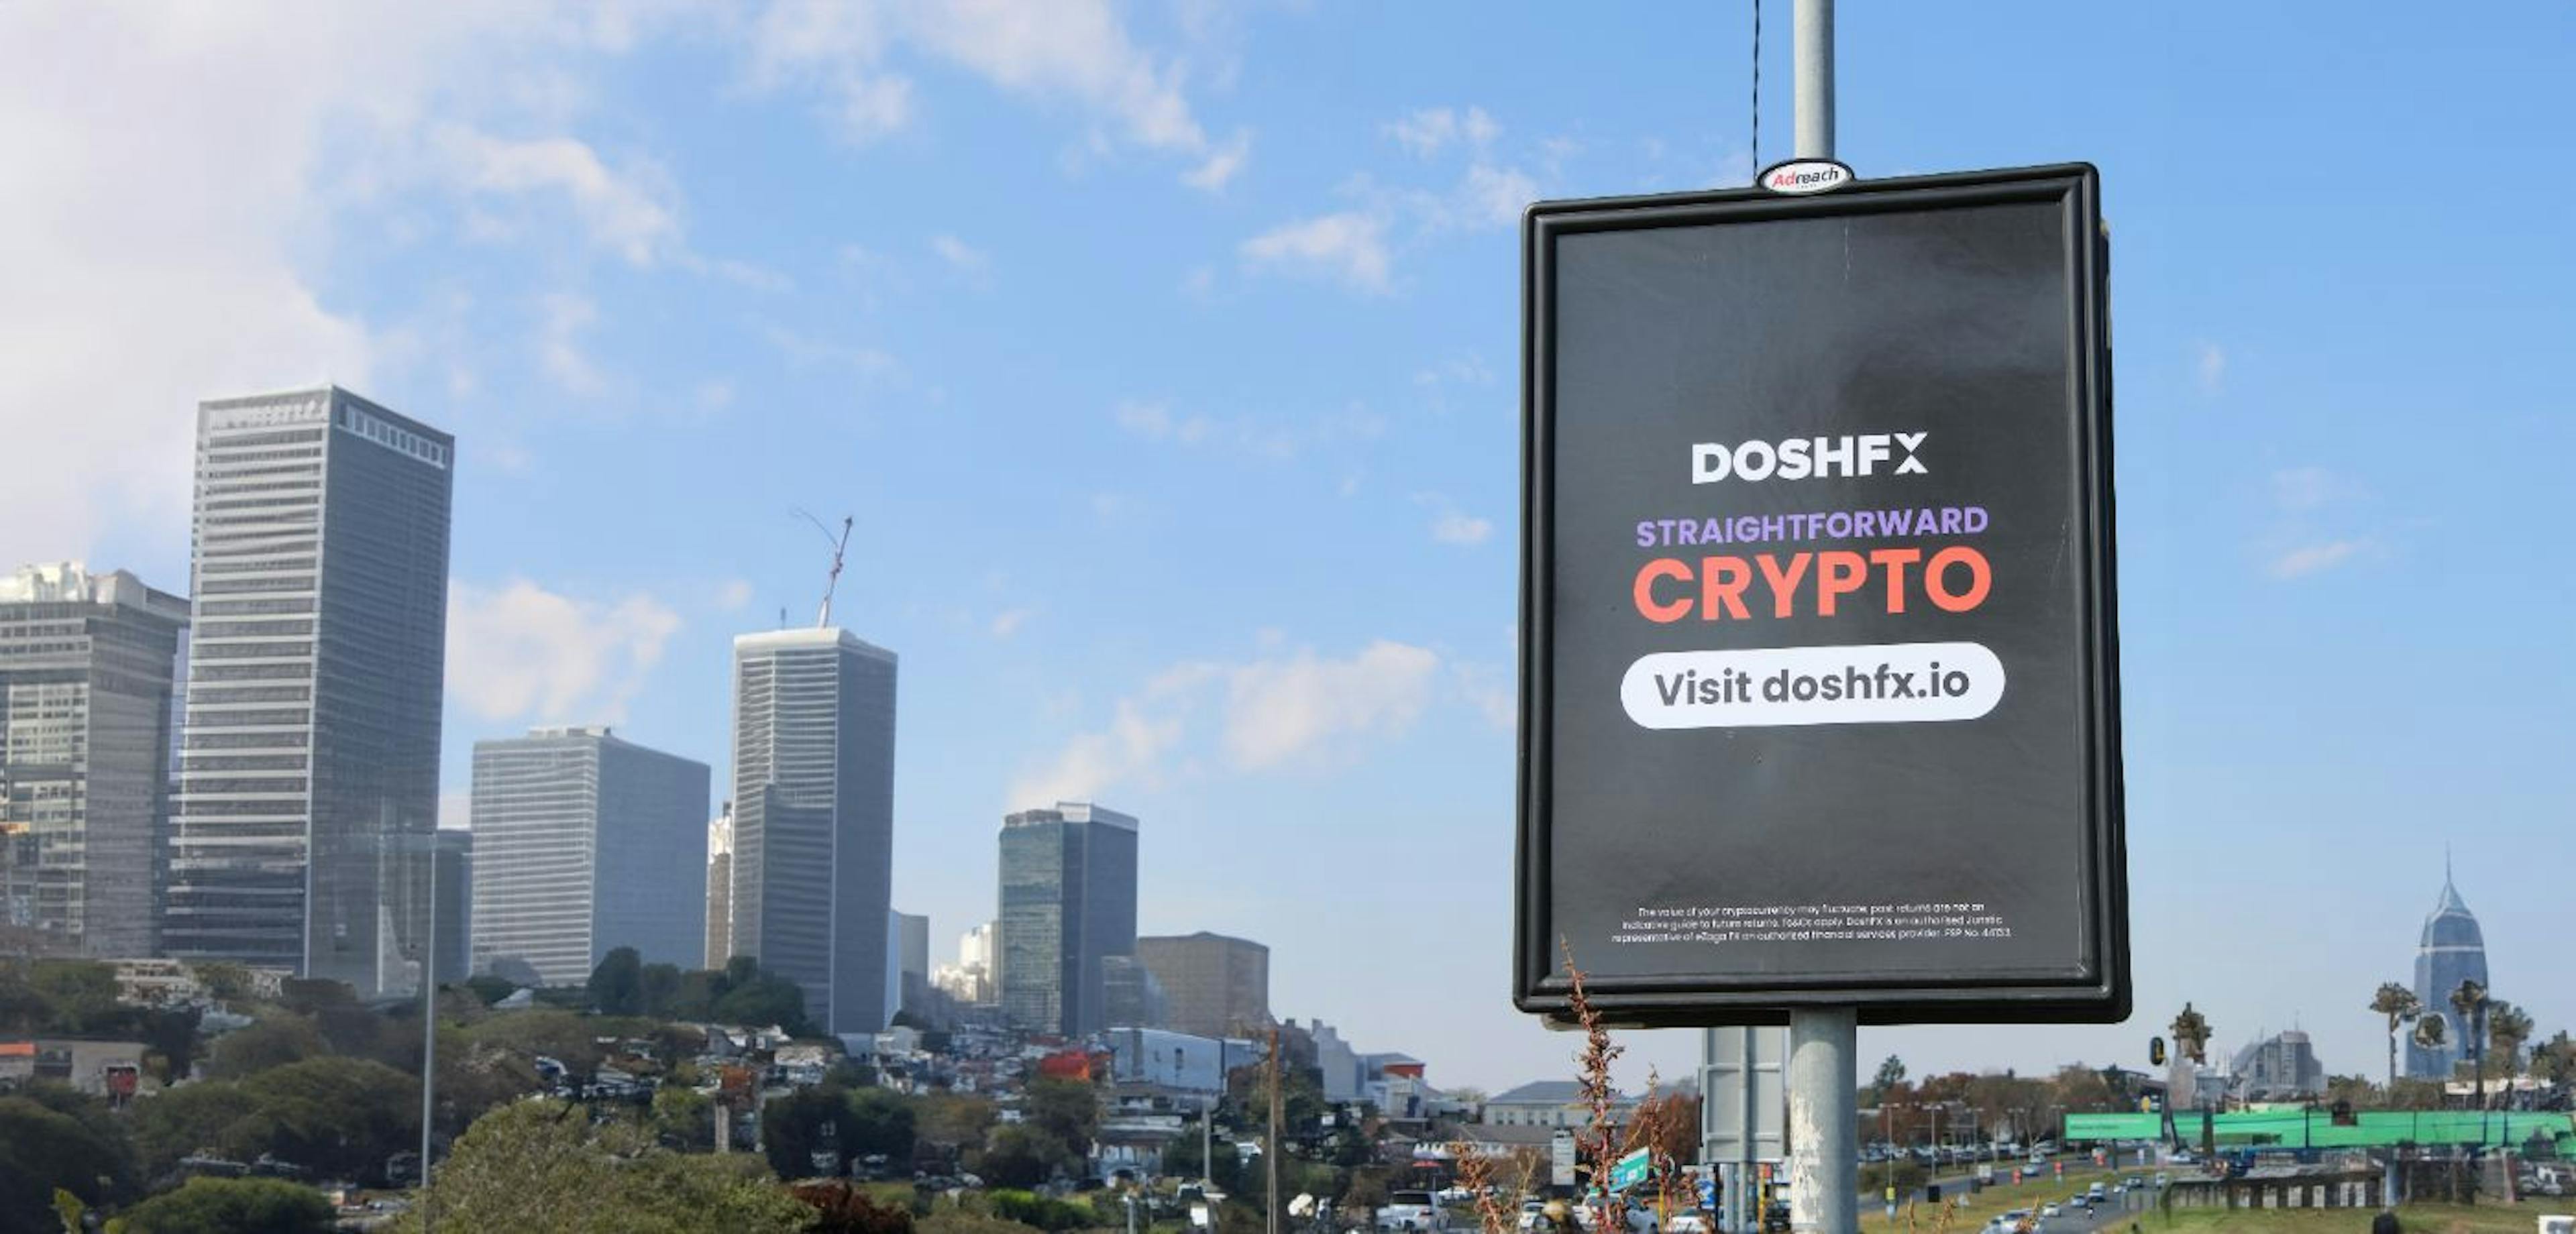 featured image - Digital Assets for Financial Inclusion: DoshFX's Revolution in South Africa